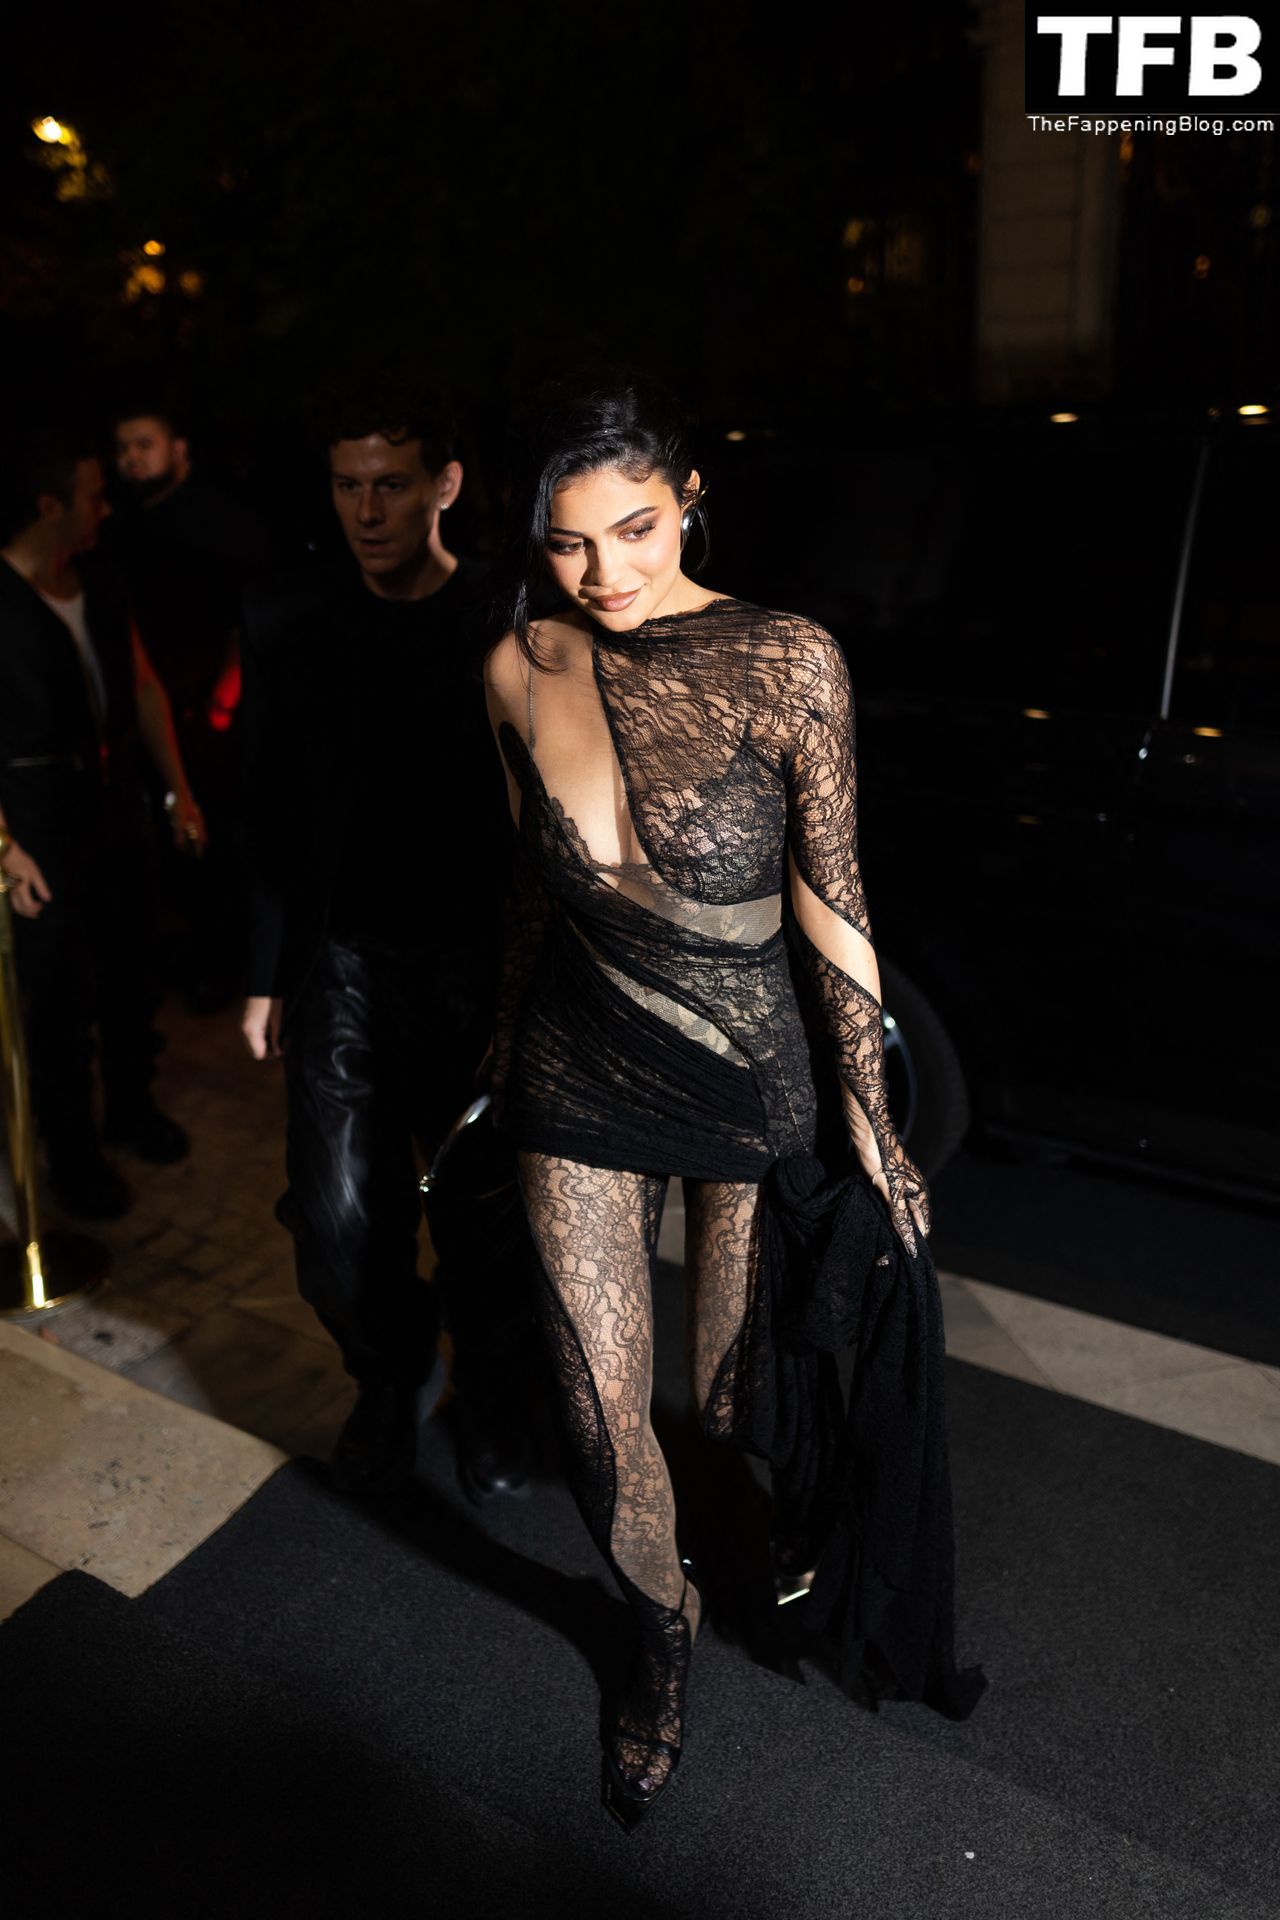 Kylie-Jenner-Sexy-The-Fappening-Blog-128.jpg